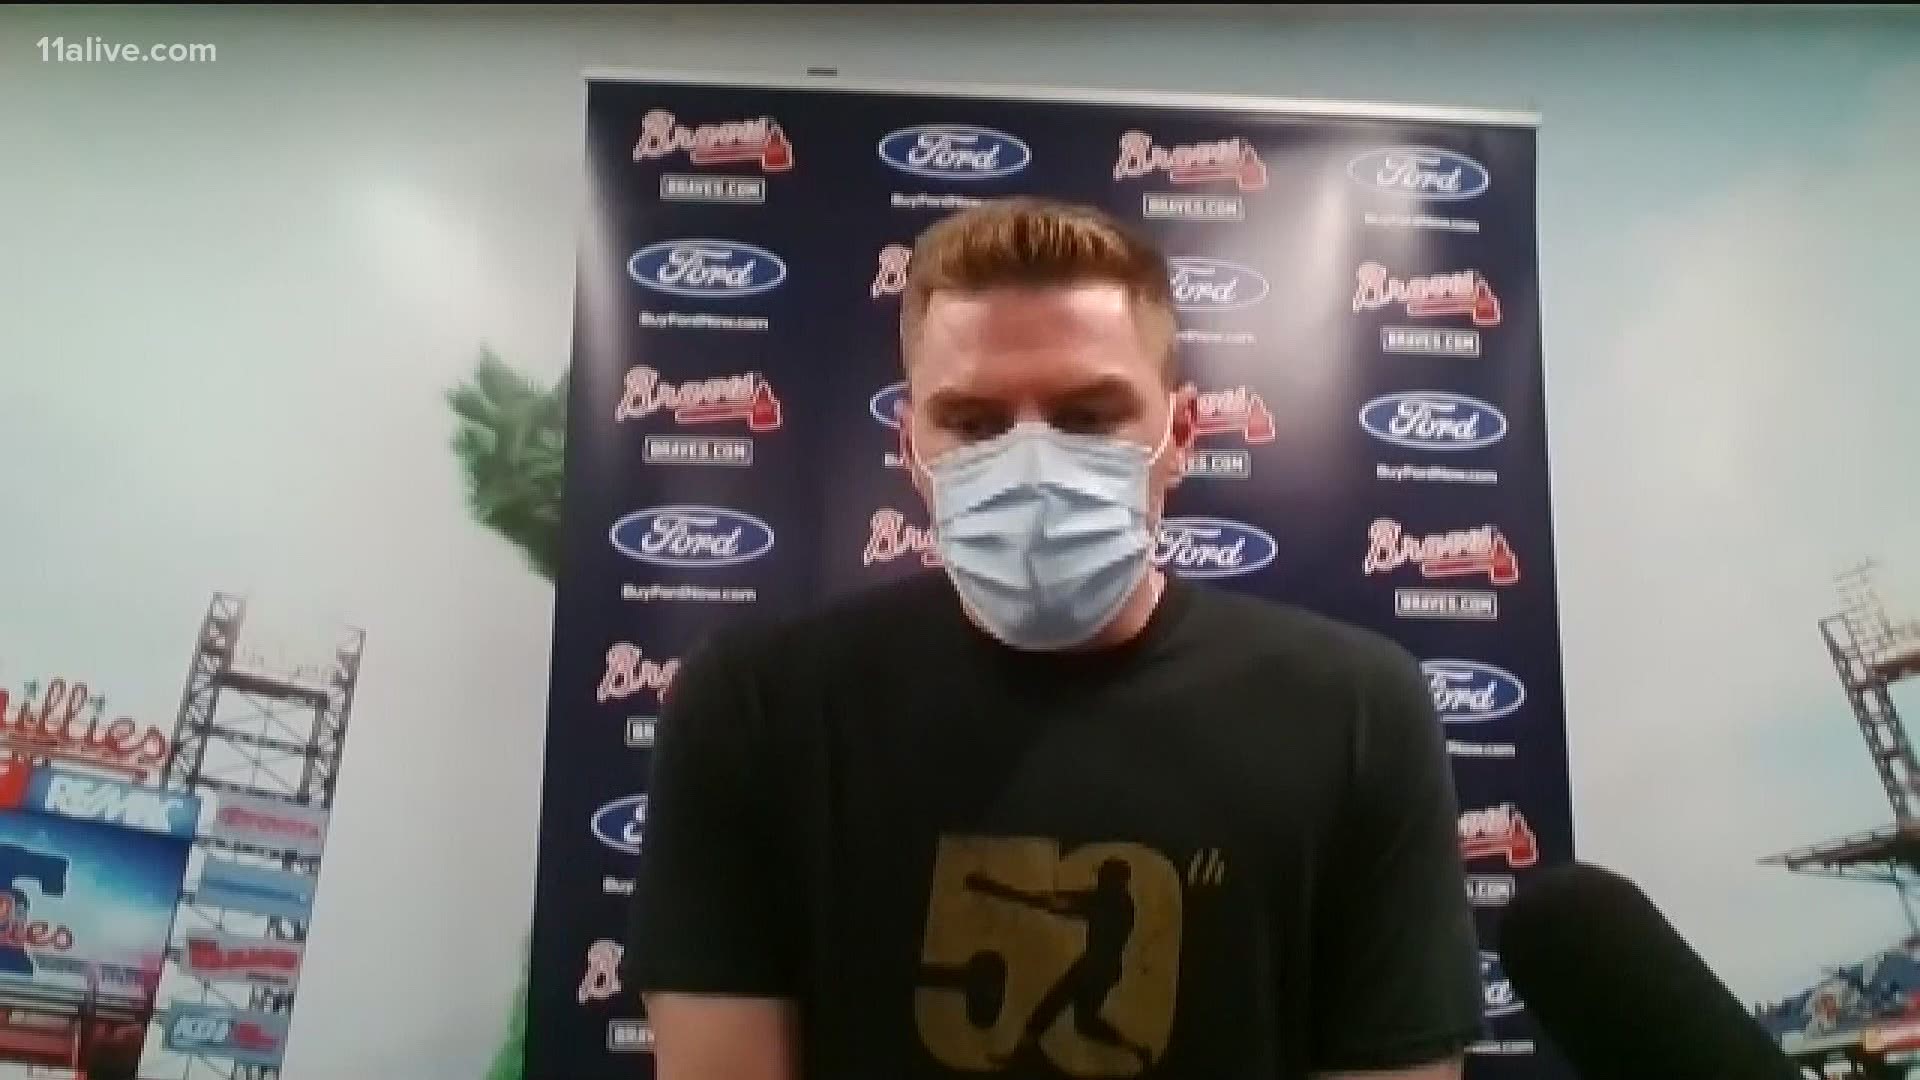 Braves first baseman Freddie Freeman spoke to 11Alive about the initiative.